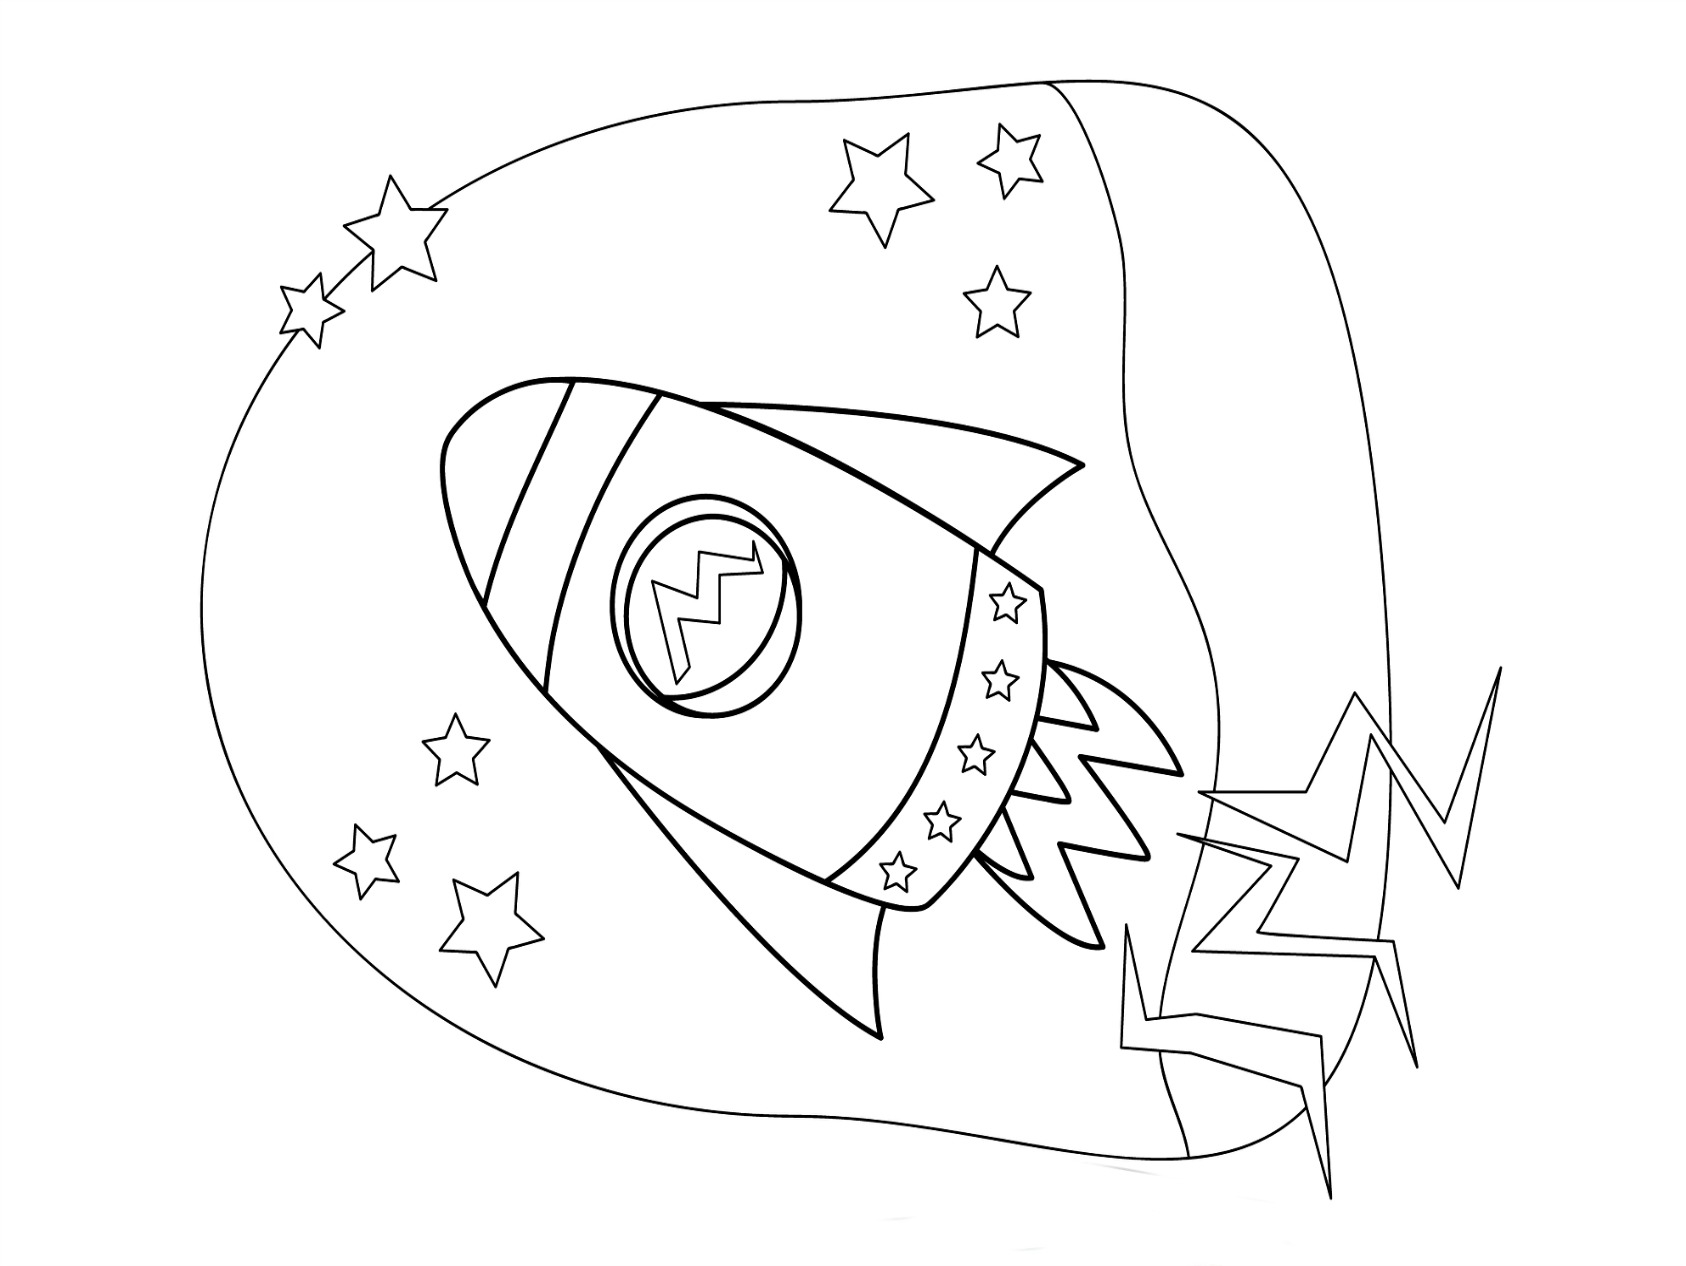 free-printable-rocket-ship-coloring-pages-for-kids